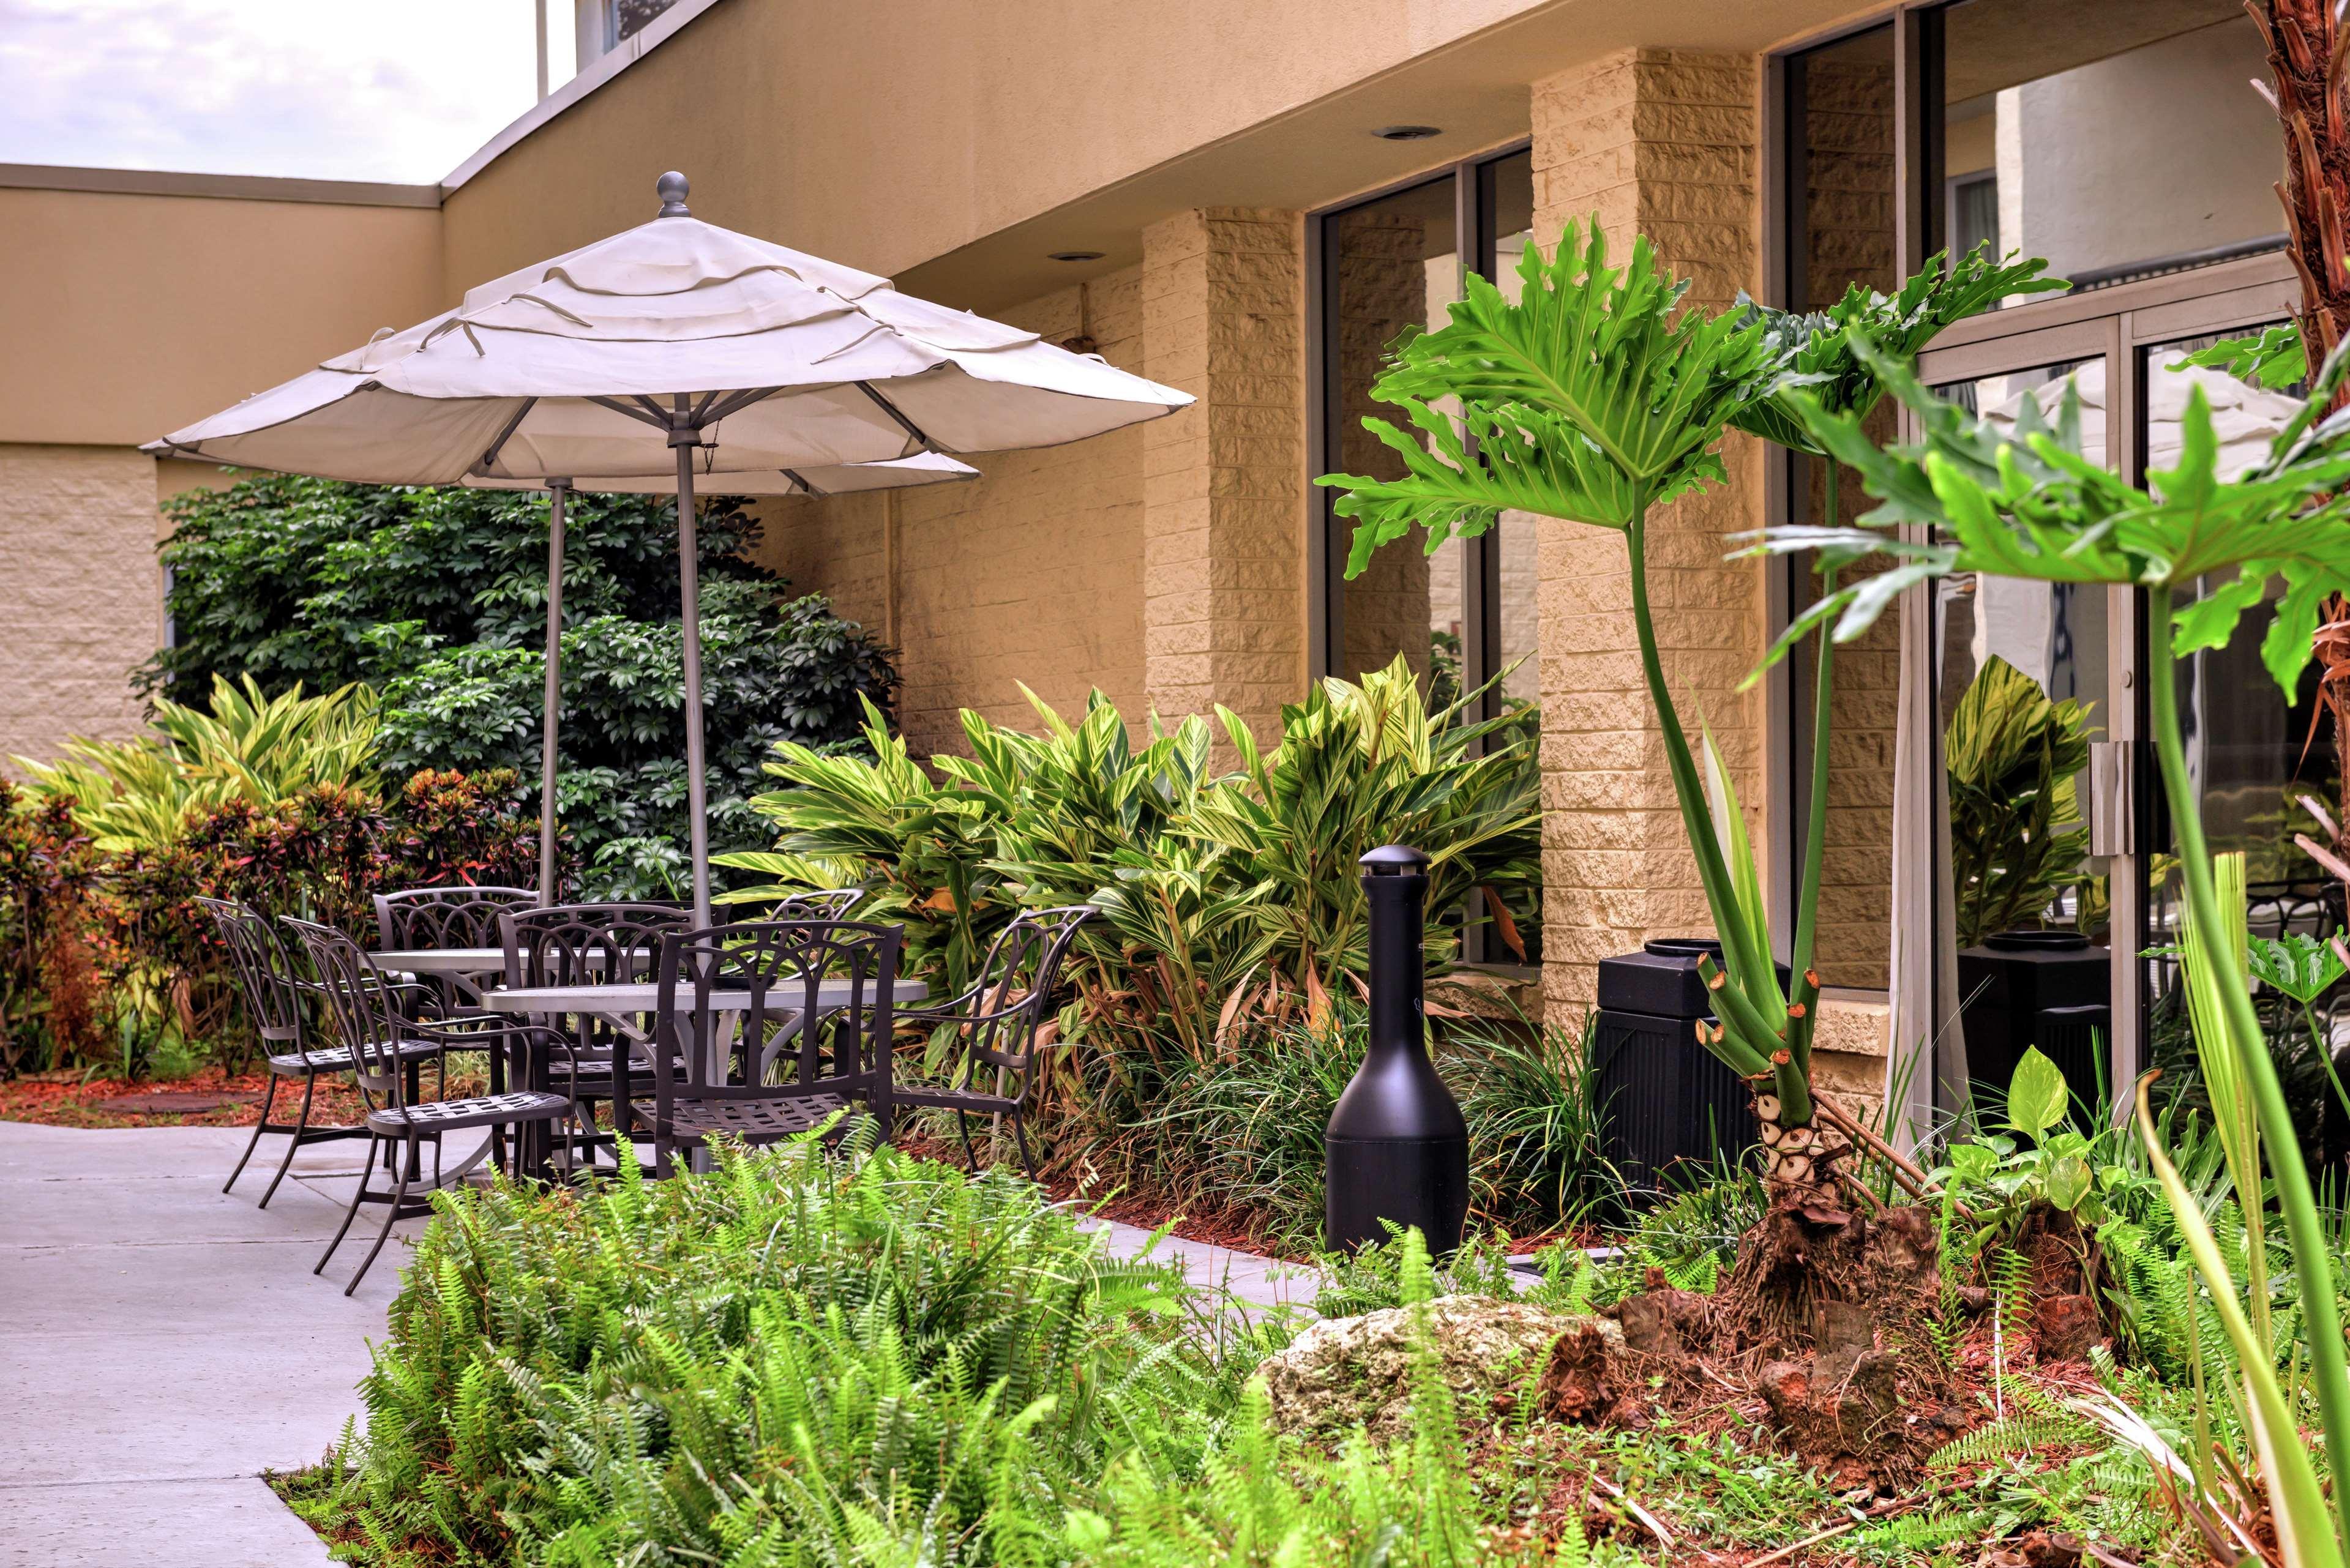 Doubletree By Hilton Hotel Tampa Airport-Westshore Exterior photo